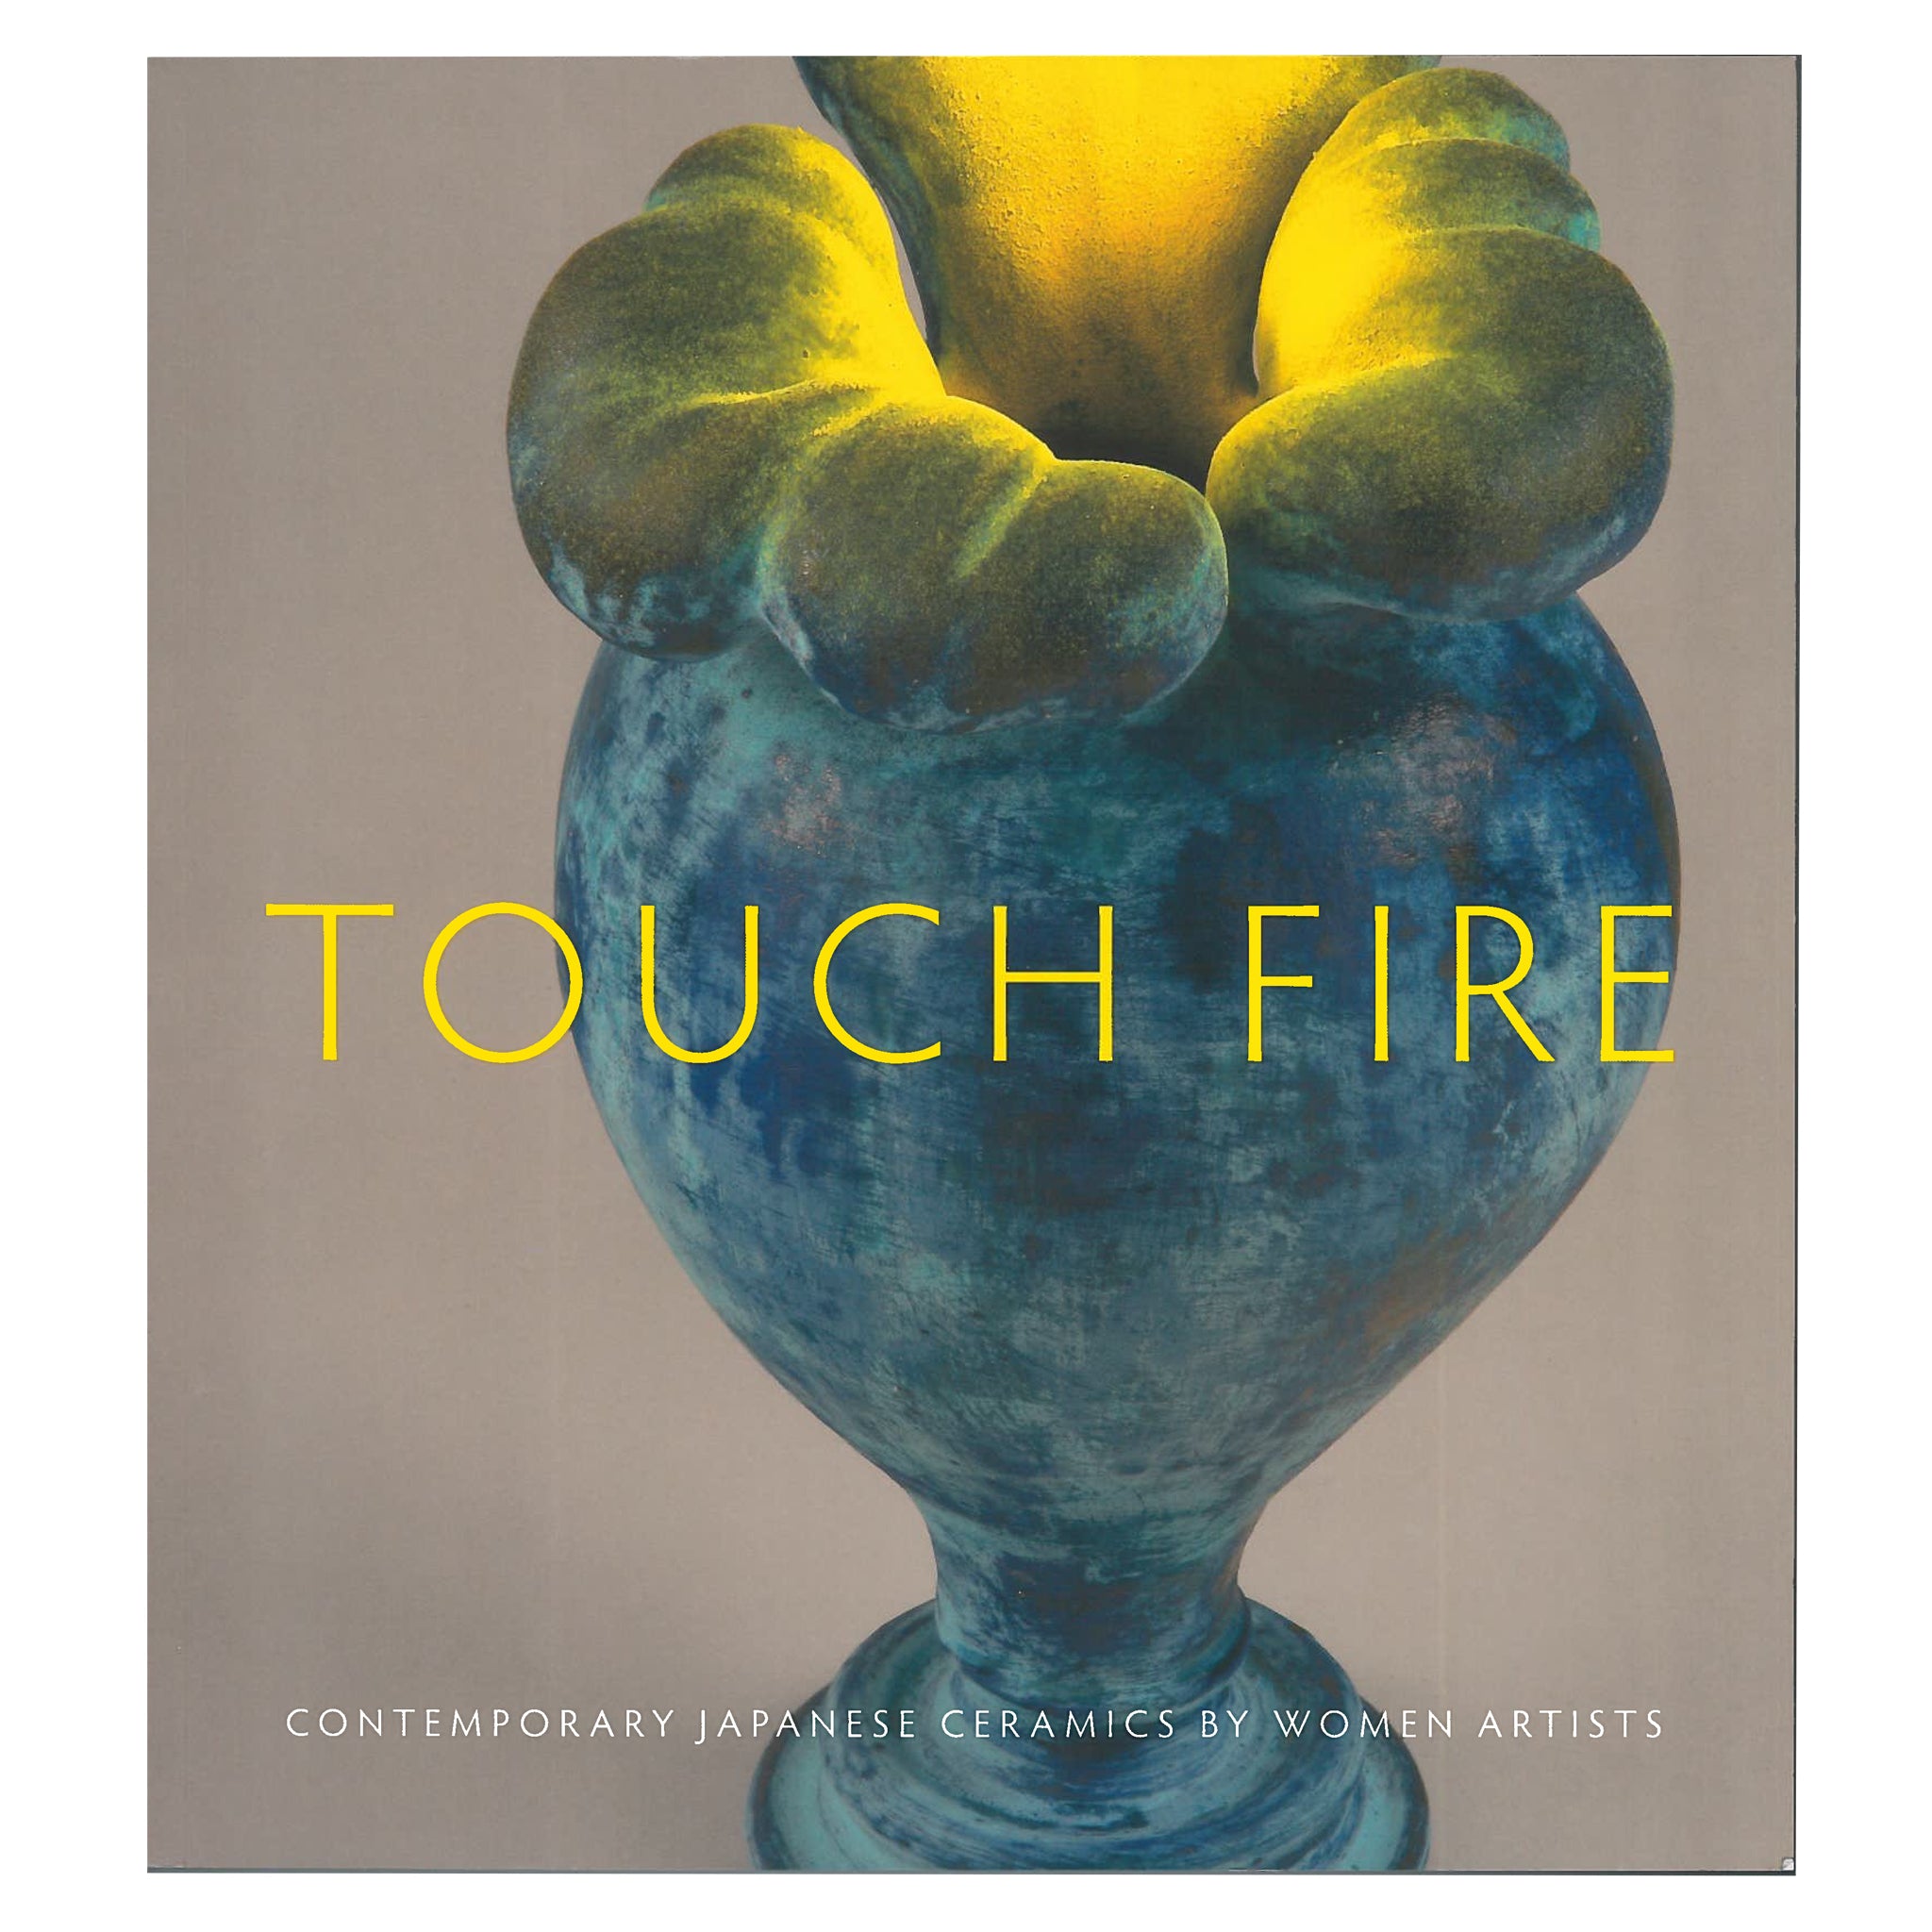 touch fire touchfire softcover paperback book women sculpture ceramics Japan Japanese collection analysis scma smith college museum of art